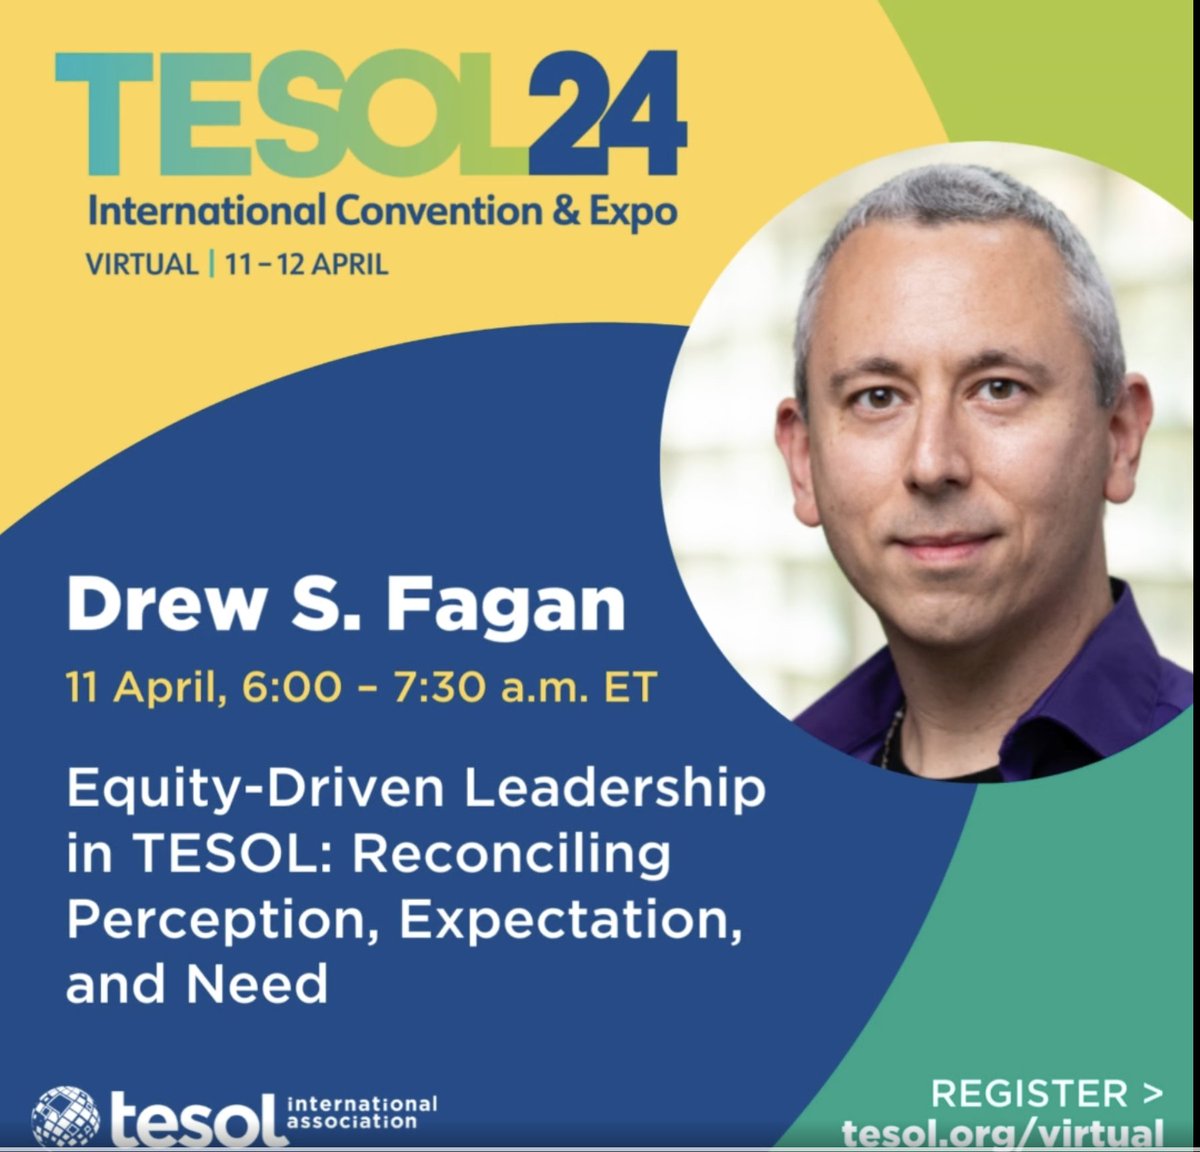 Maryland #TESOL continues to succeed at the international levels!
Our Immediate Past-President, Dr. Drew Fagan, was the opening keynote speaker at the TESOL International Virtual Conference.

But that's not all-